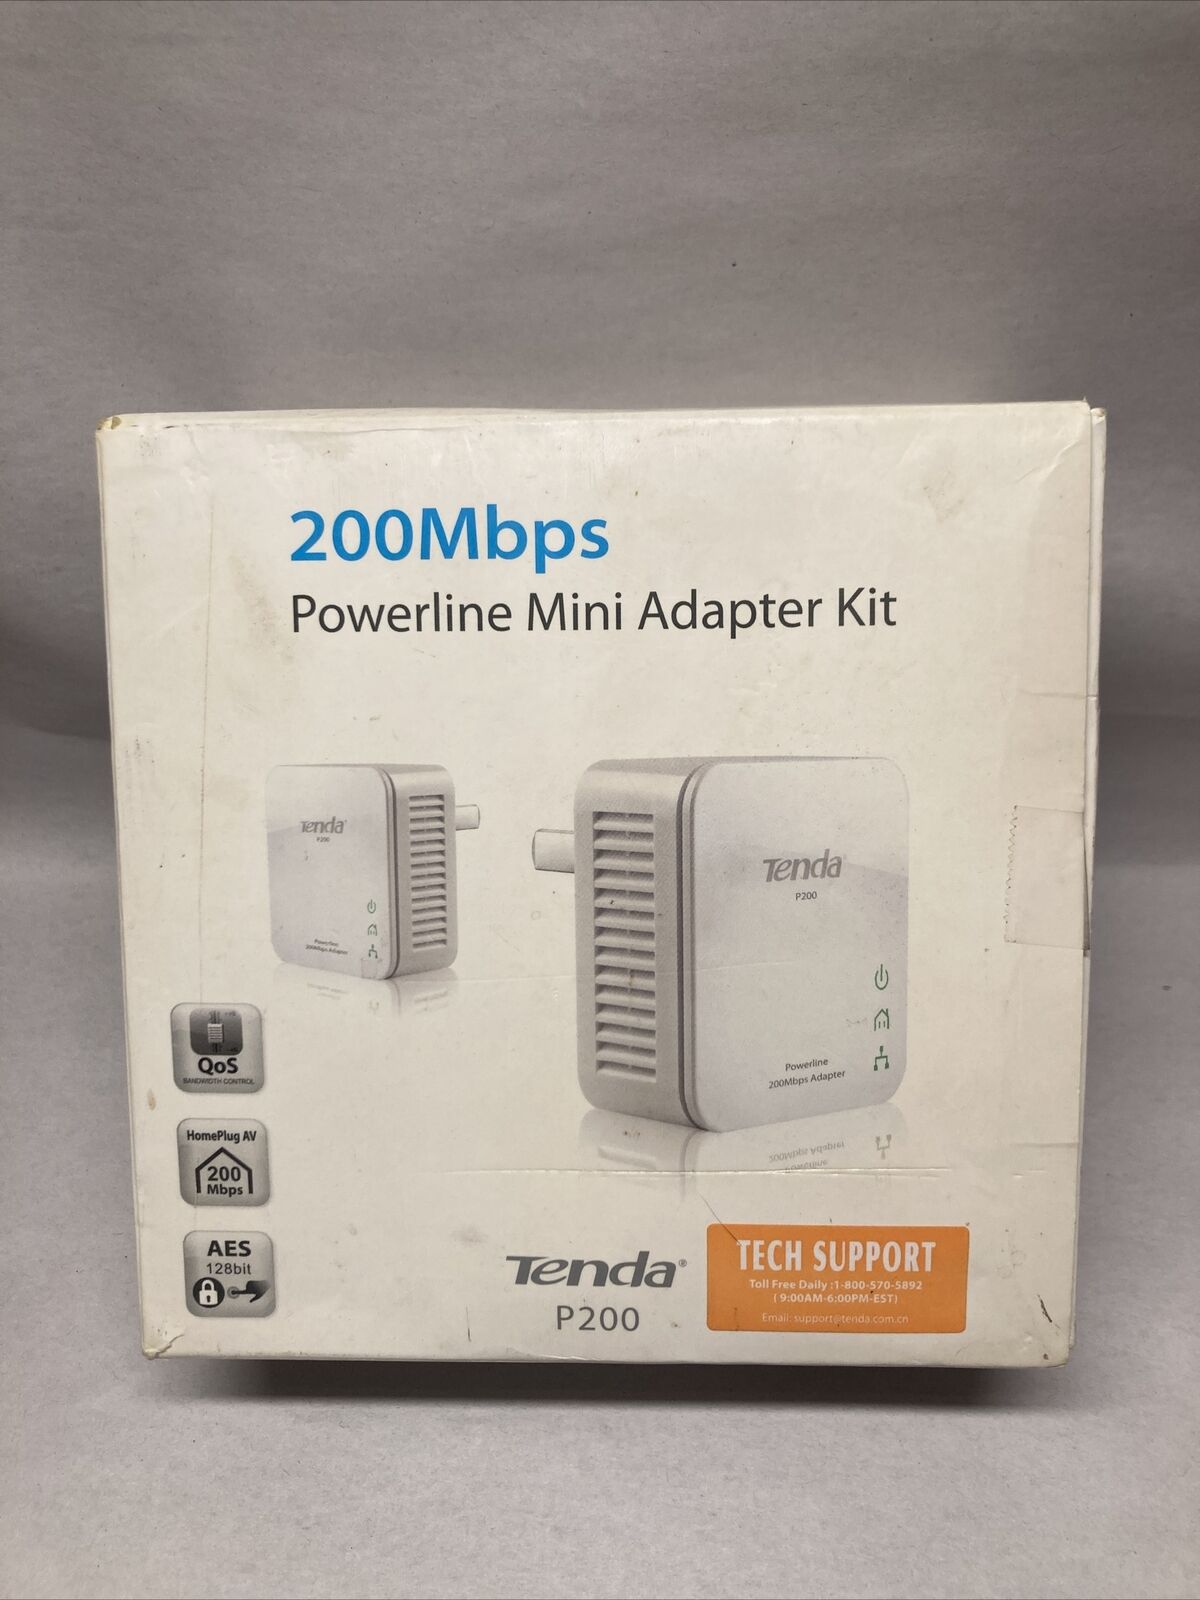 Tenda P200 Powerline Mini Adapters Up to 200Mbps PLC Adapters - New open box